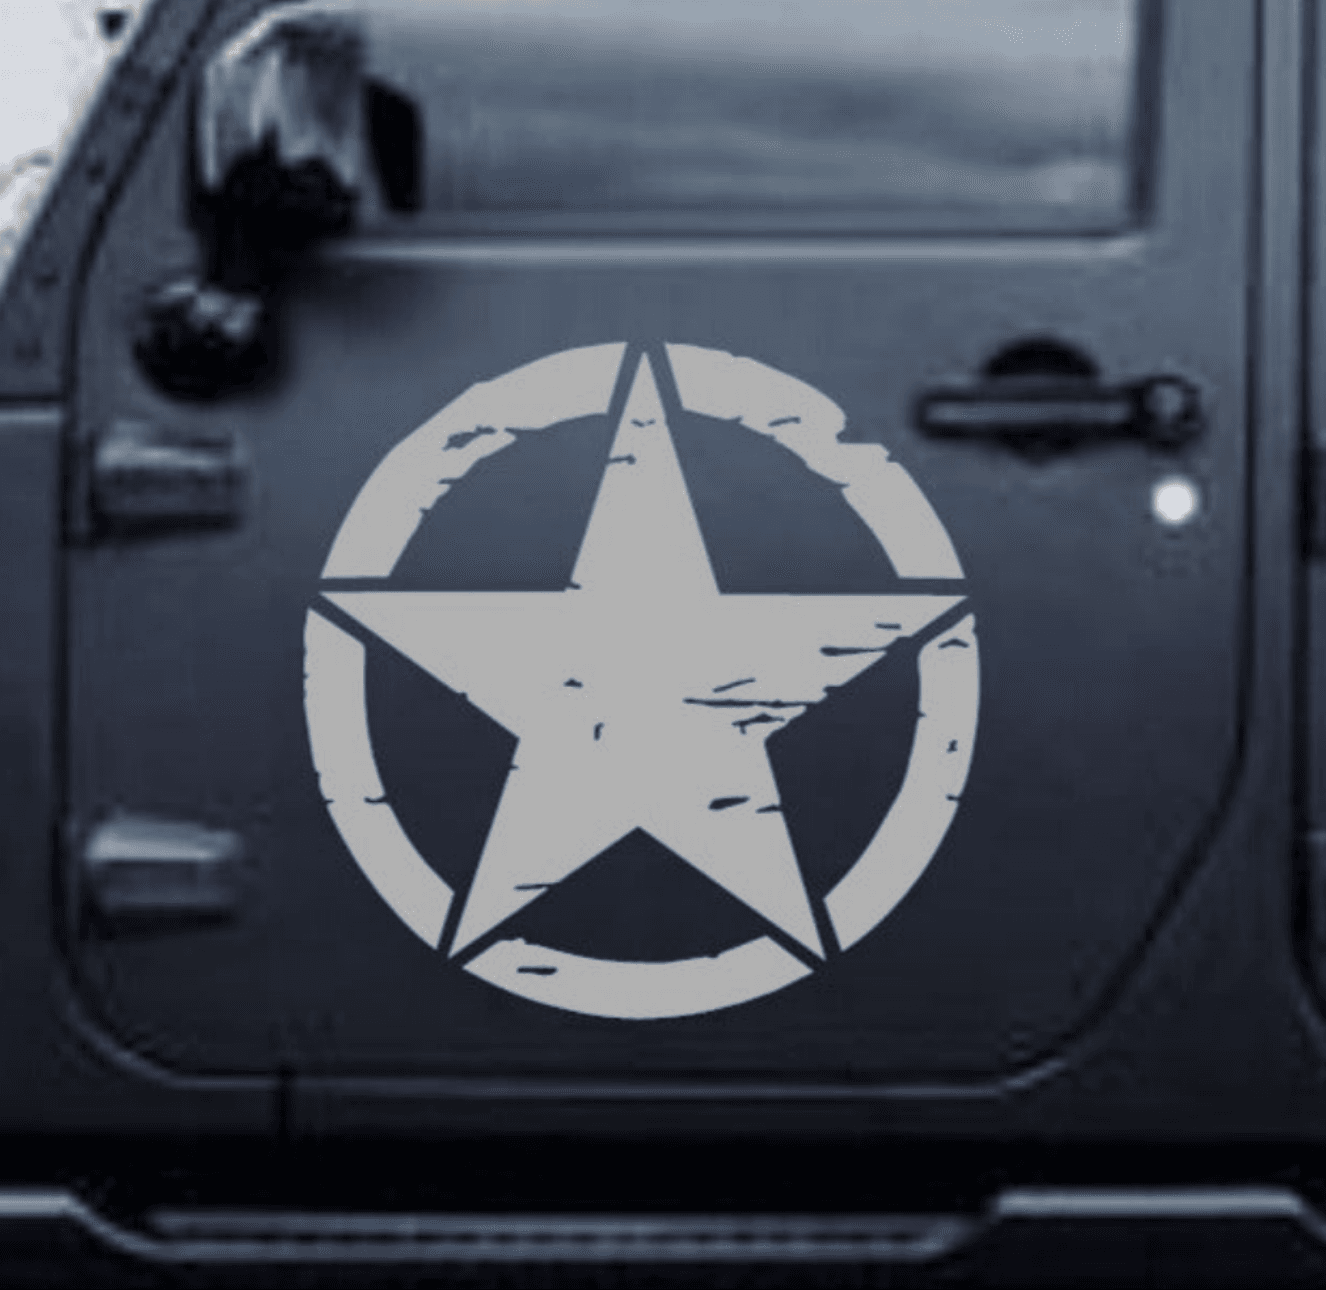 Military Star Decals for Trucks, Jeeps, Cars, SUVs | Sizes Available